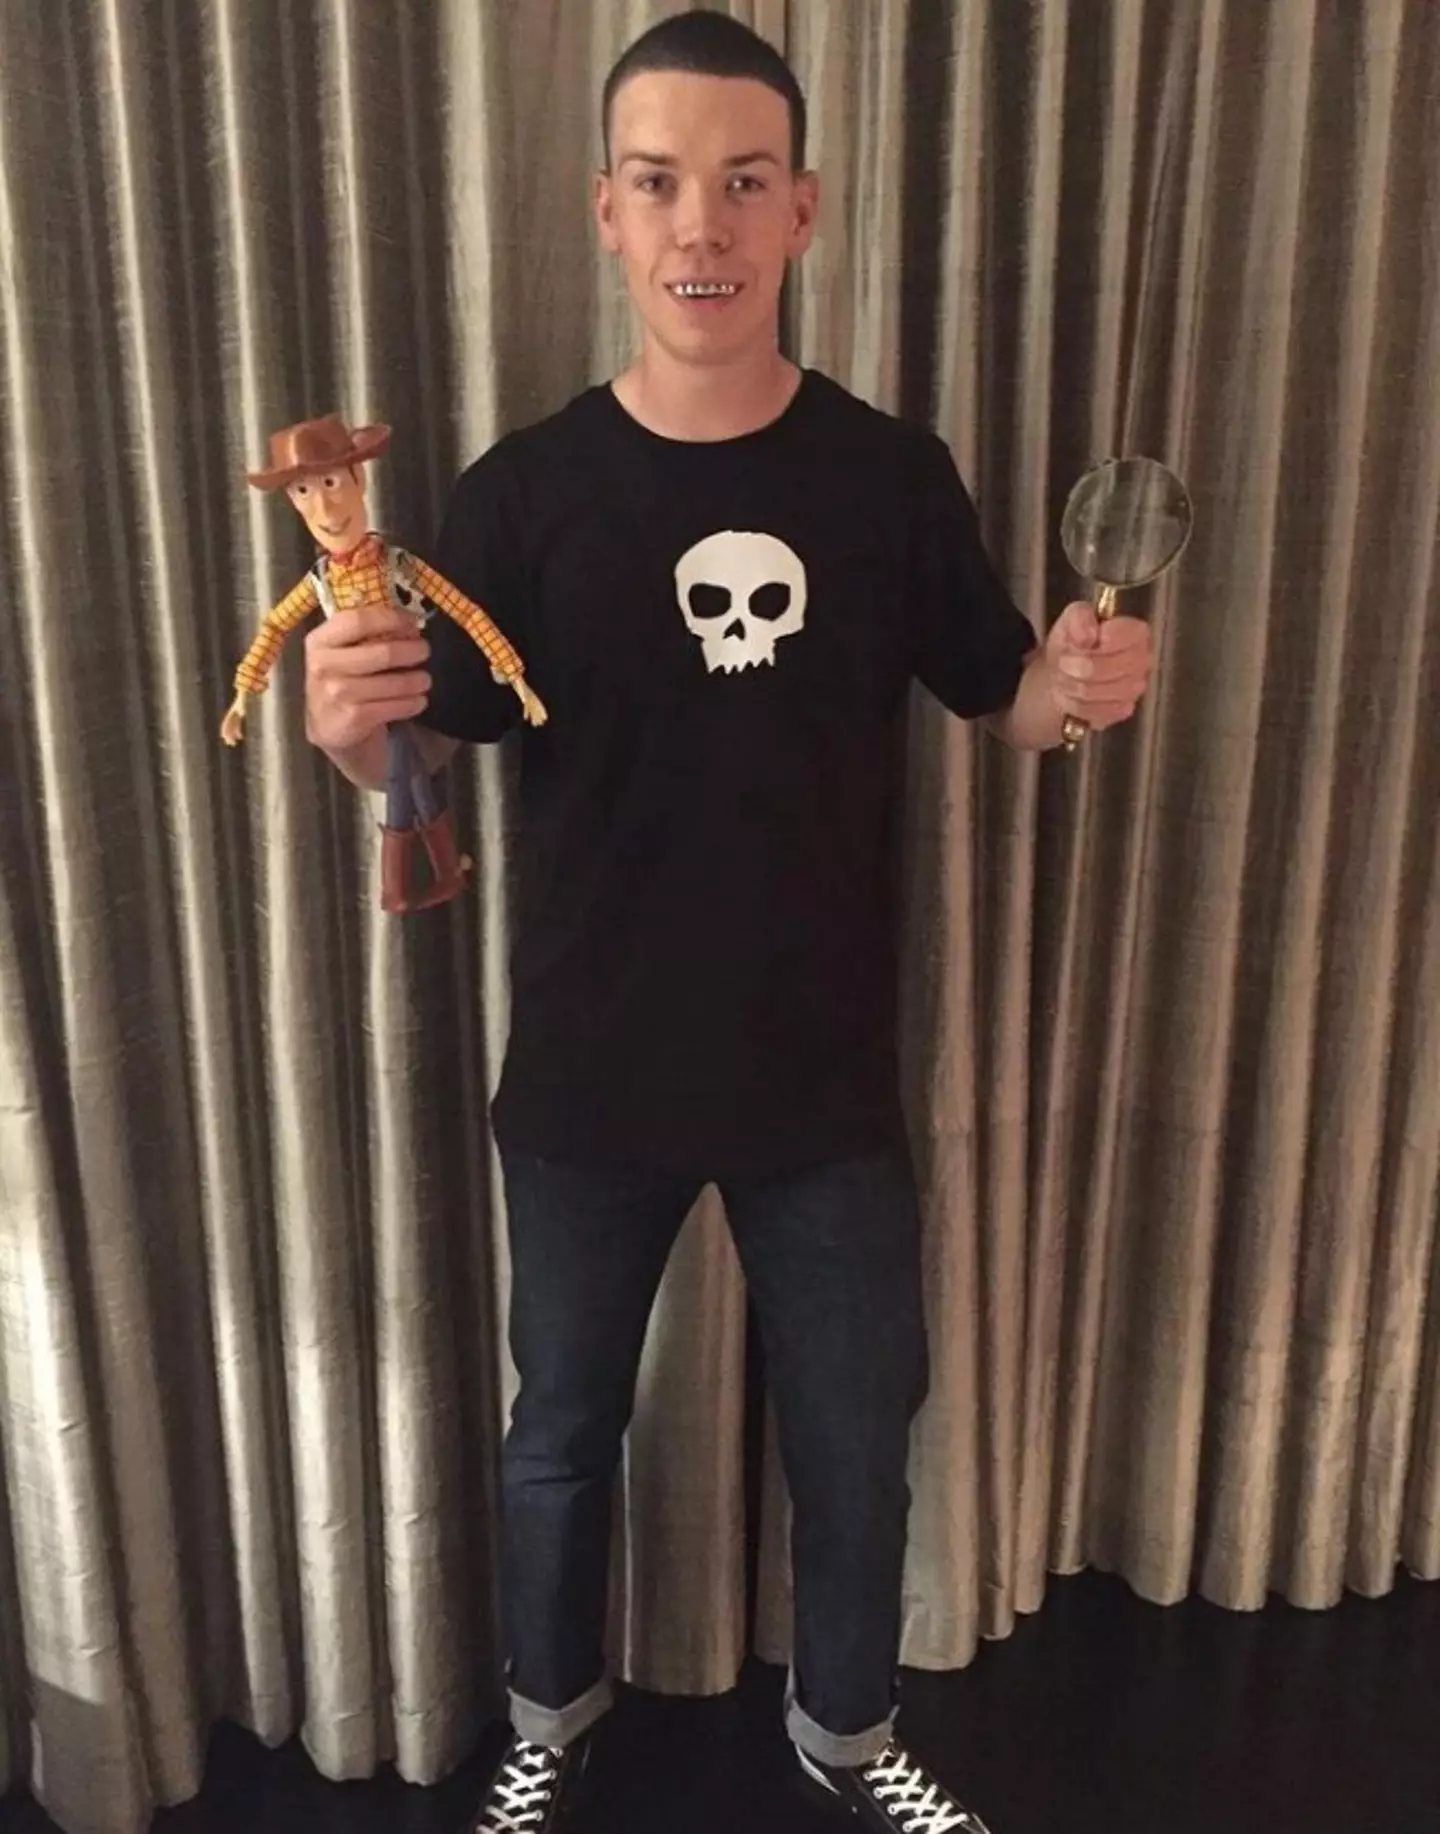 Poulter dressing up as Sid from Toy Story for an anti-bullying campaign.